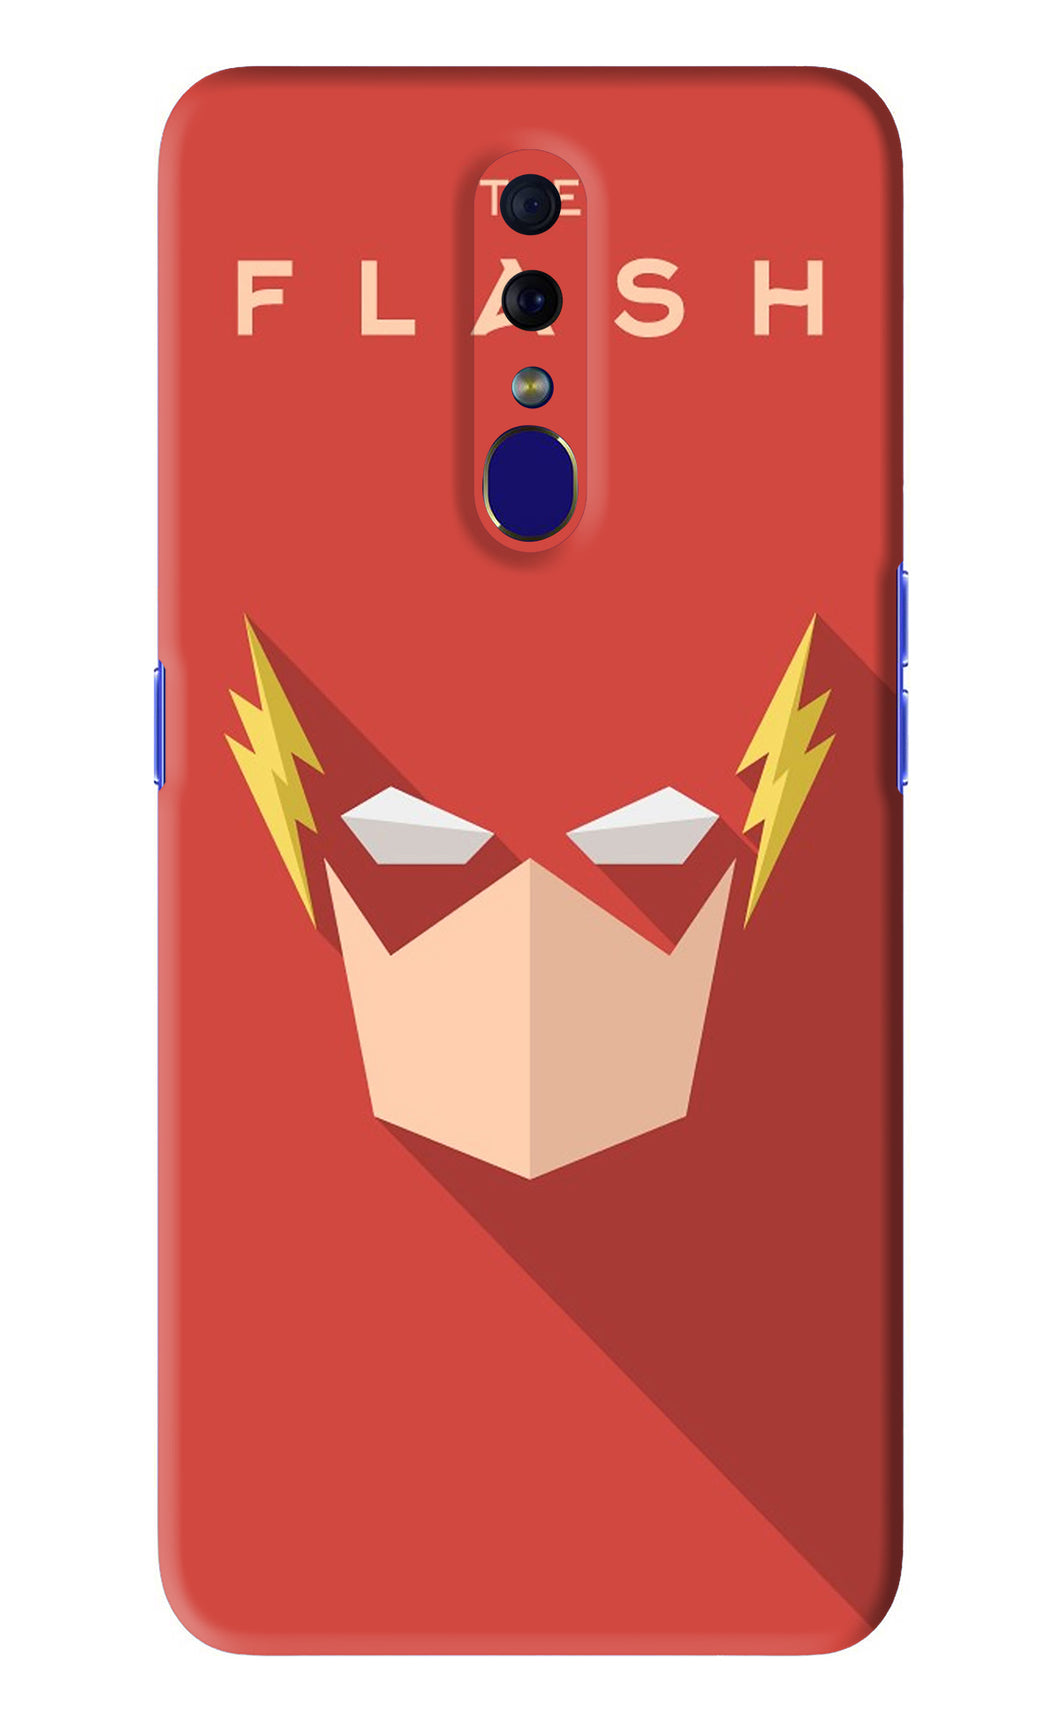 The Flash Oppo F11 Back Skin Wrap